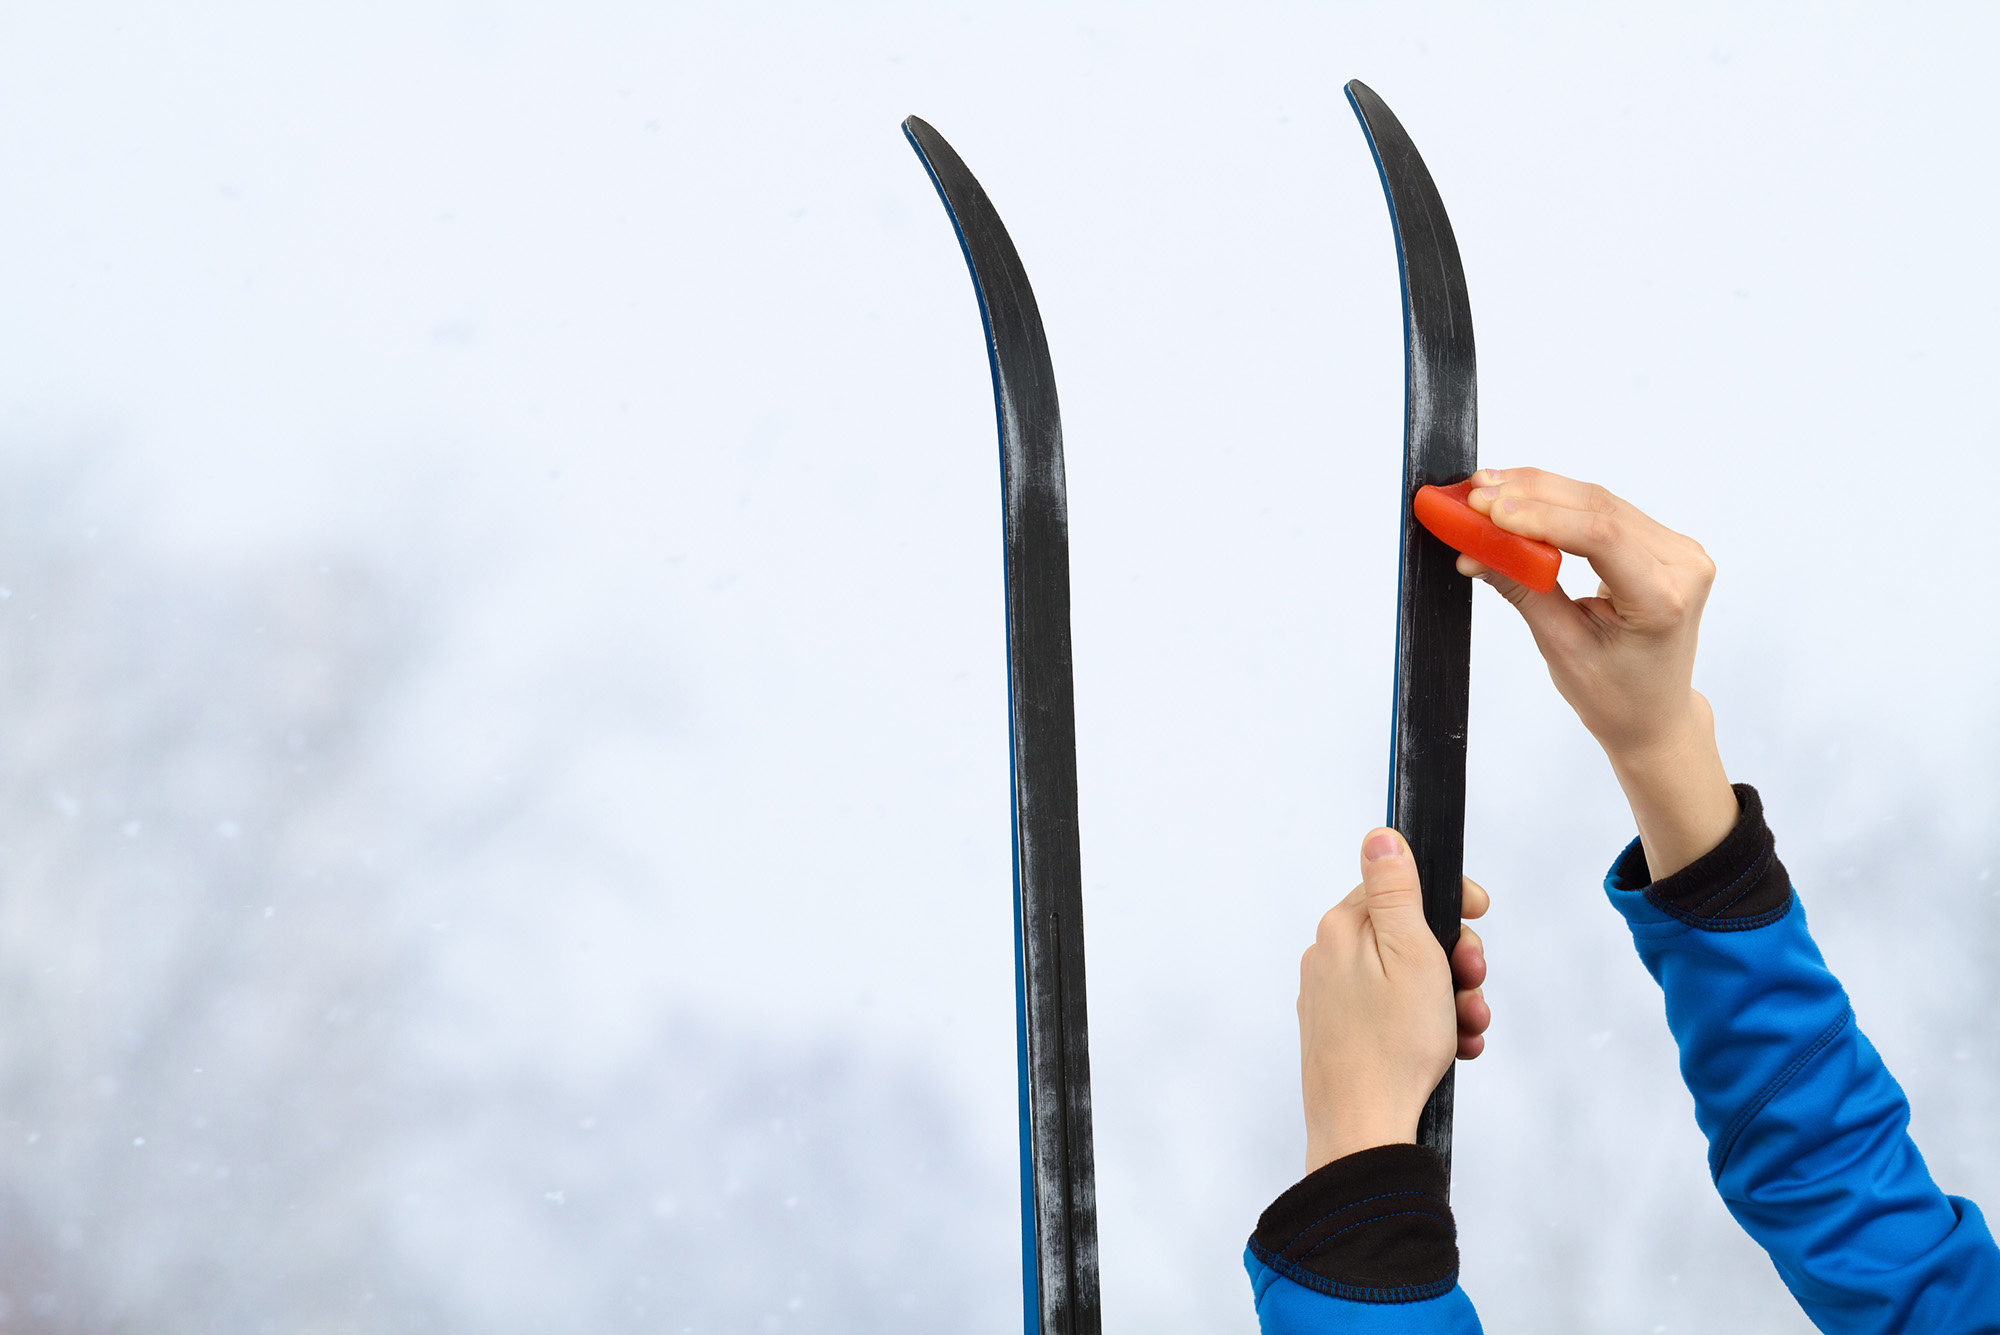 Photo: Closeup of two hands applying wax to black skis. Blurry background shows a snowy scene.